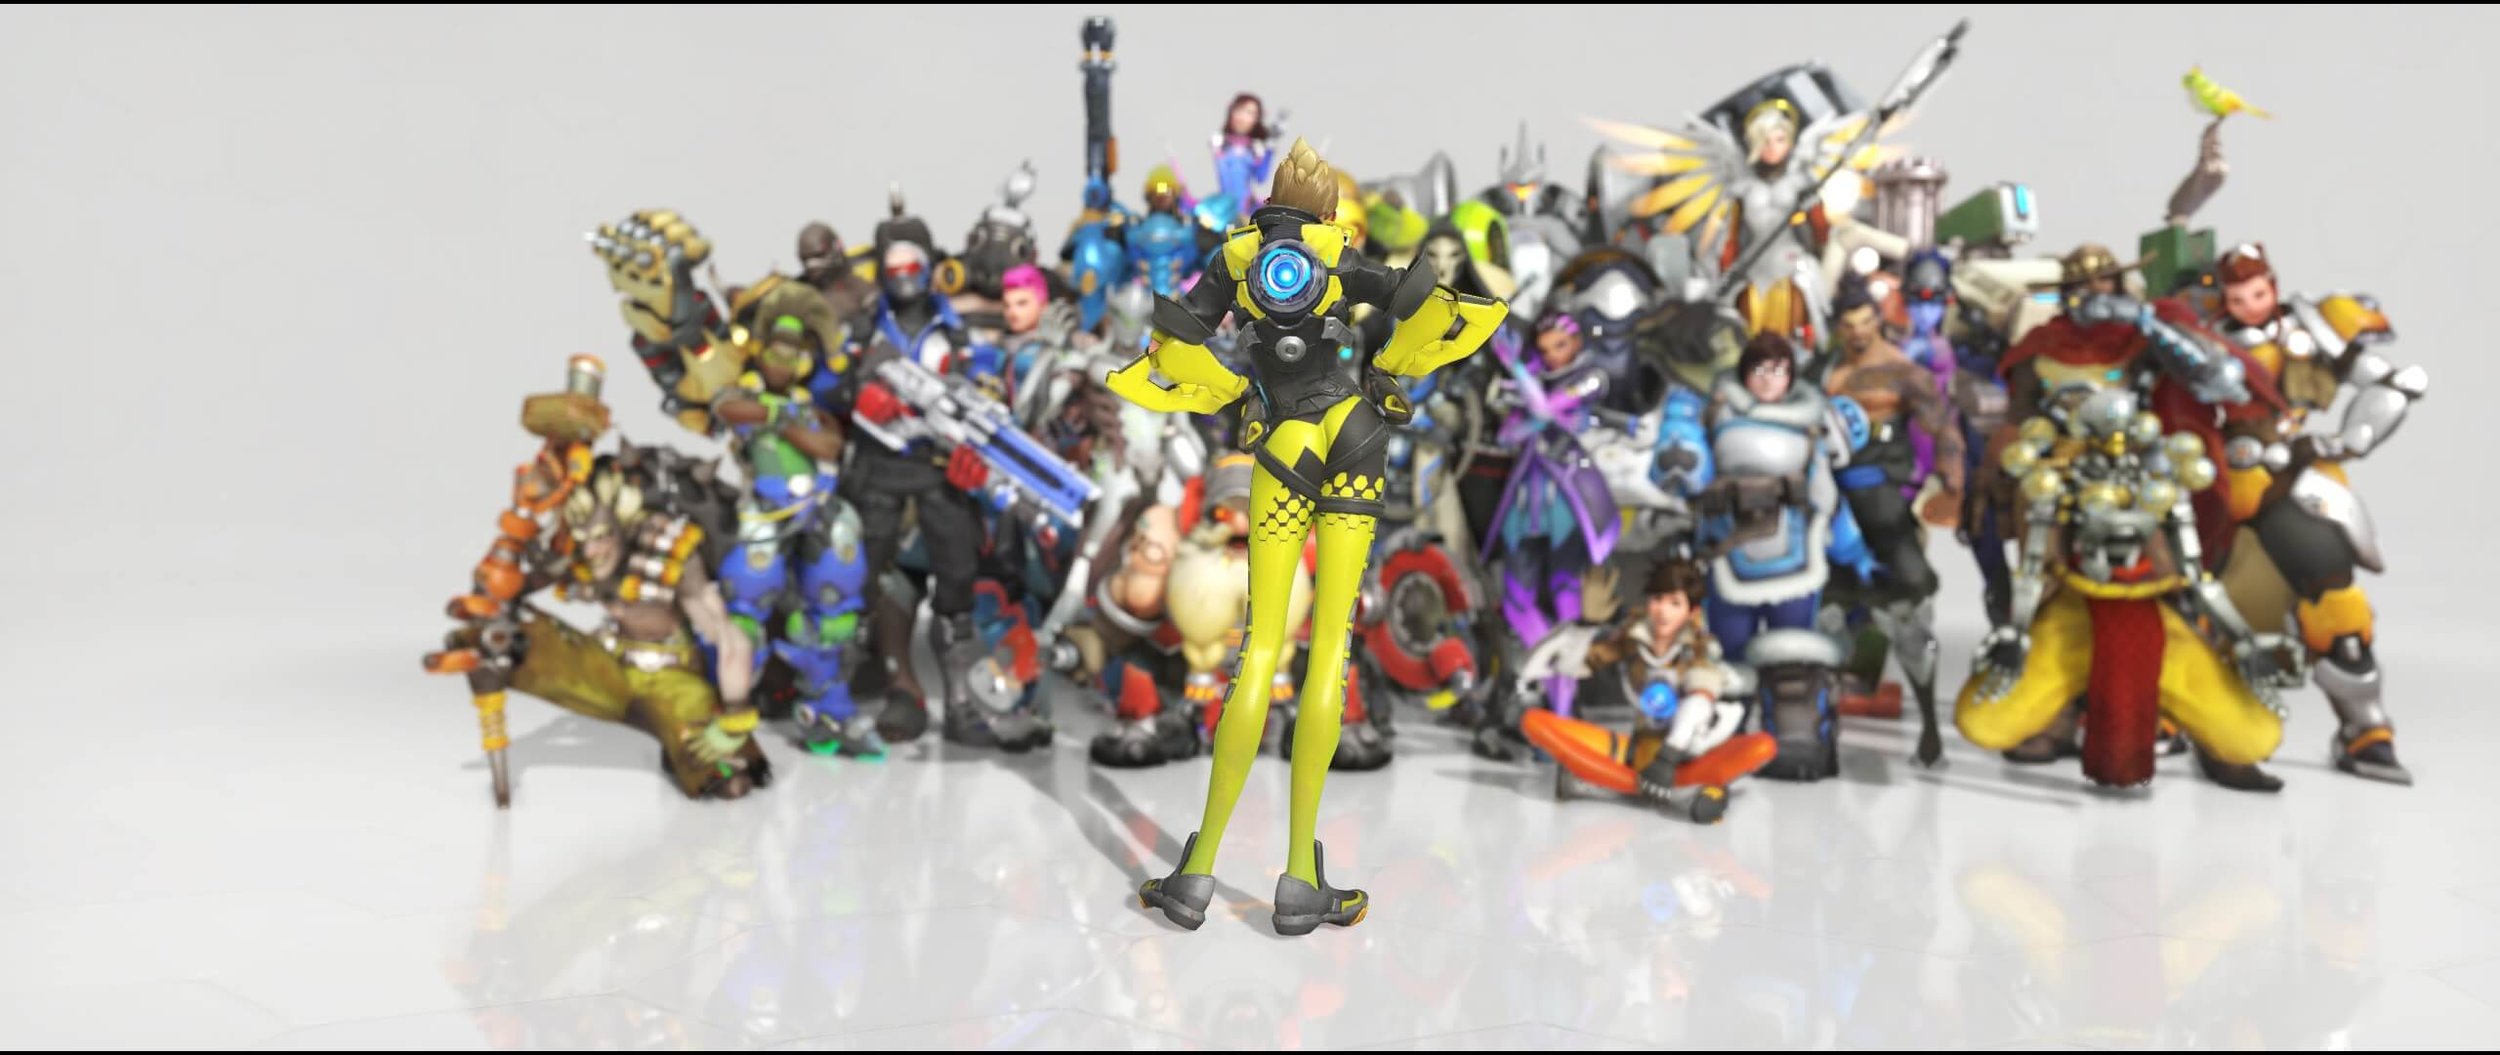 Tracer's hero and gun skins - All events included